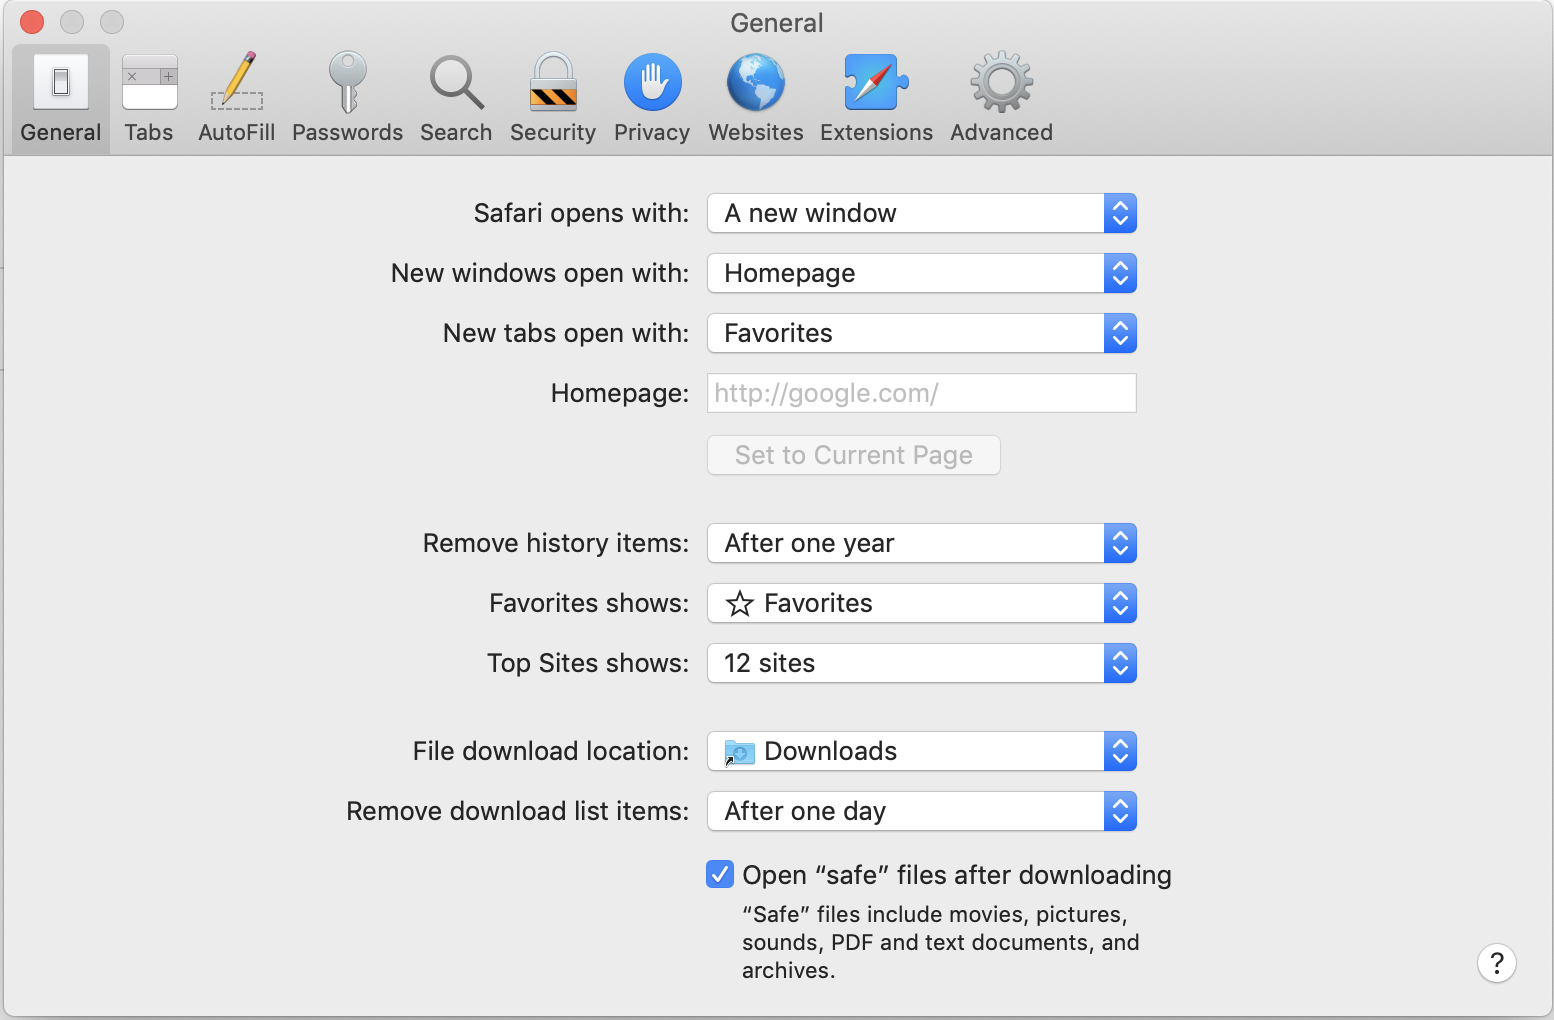 safari preferences is greyed out